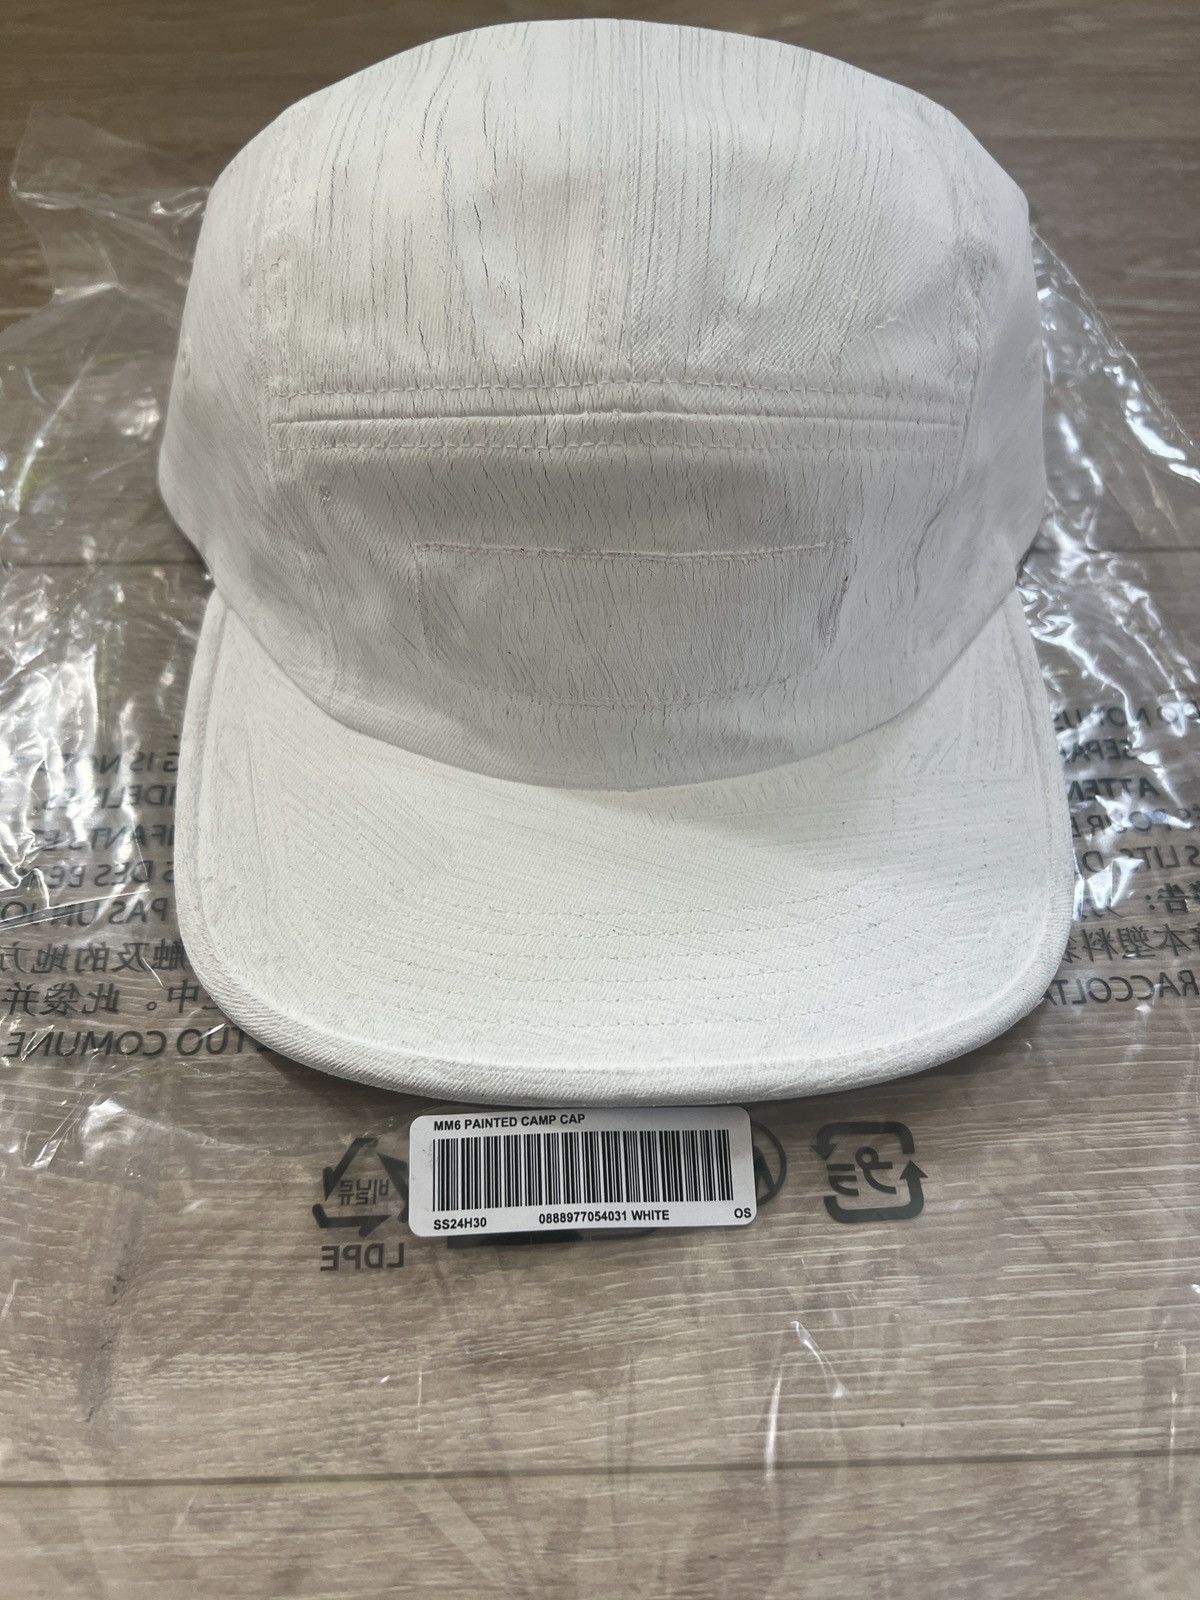 Supreme WHITE MM6 PAINTED CAMP CAP | Grailed